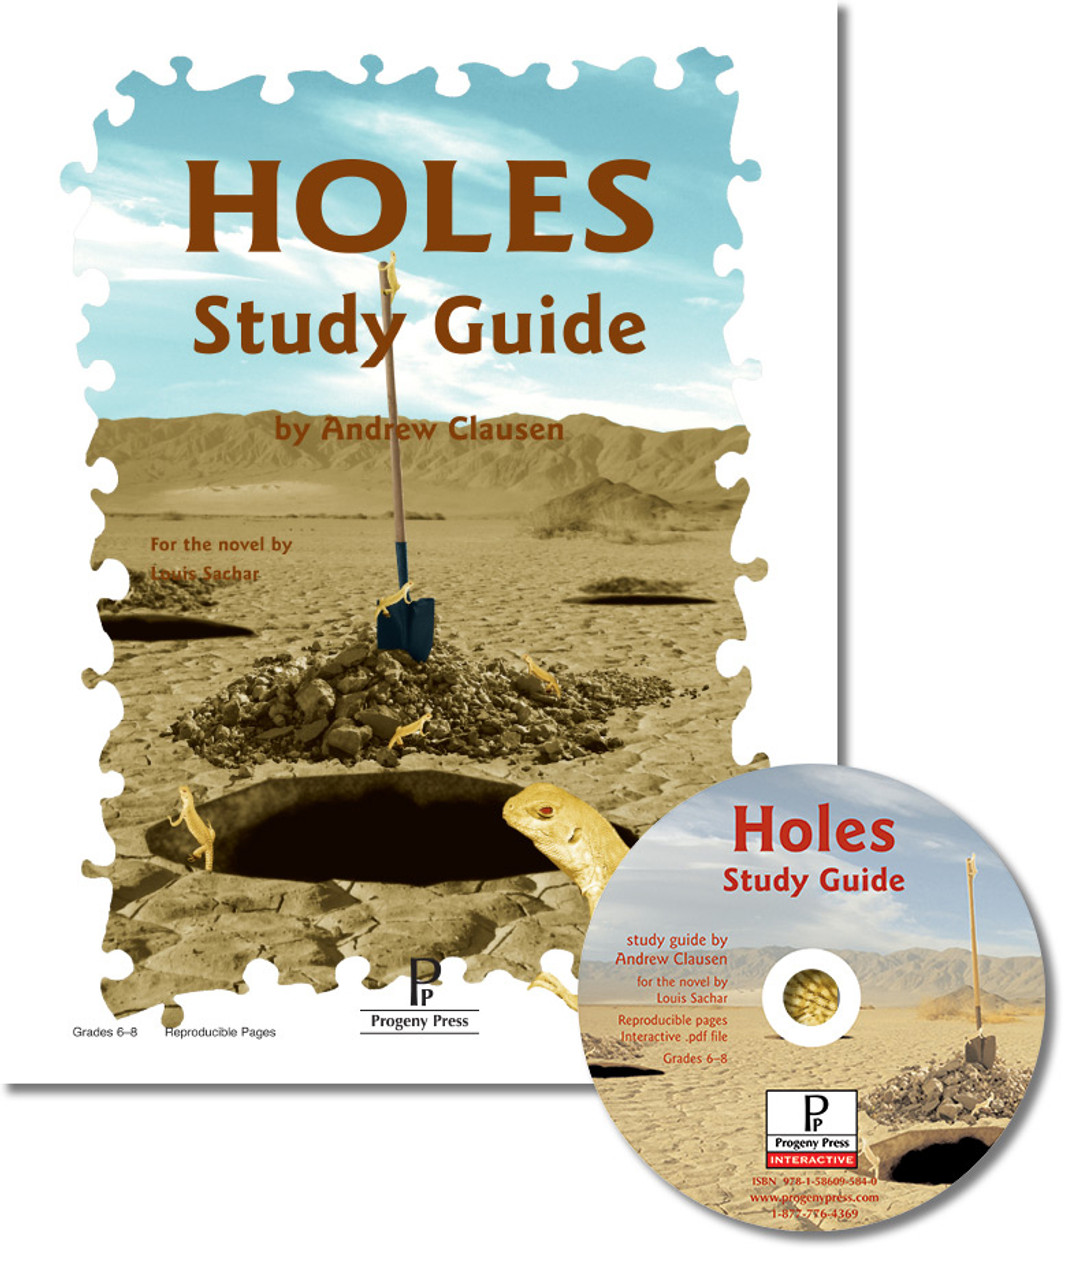 What to read after Holes by Louis Sachar